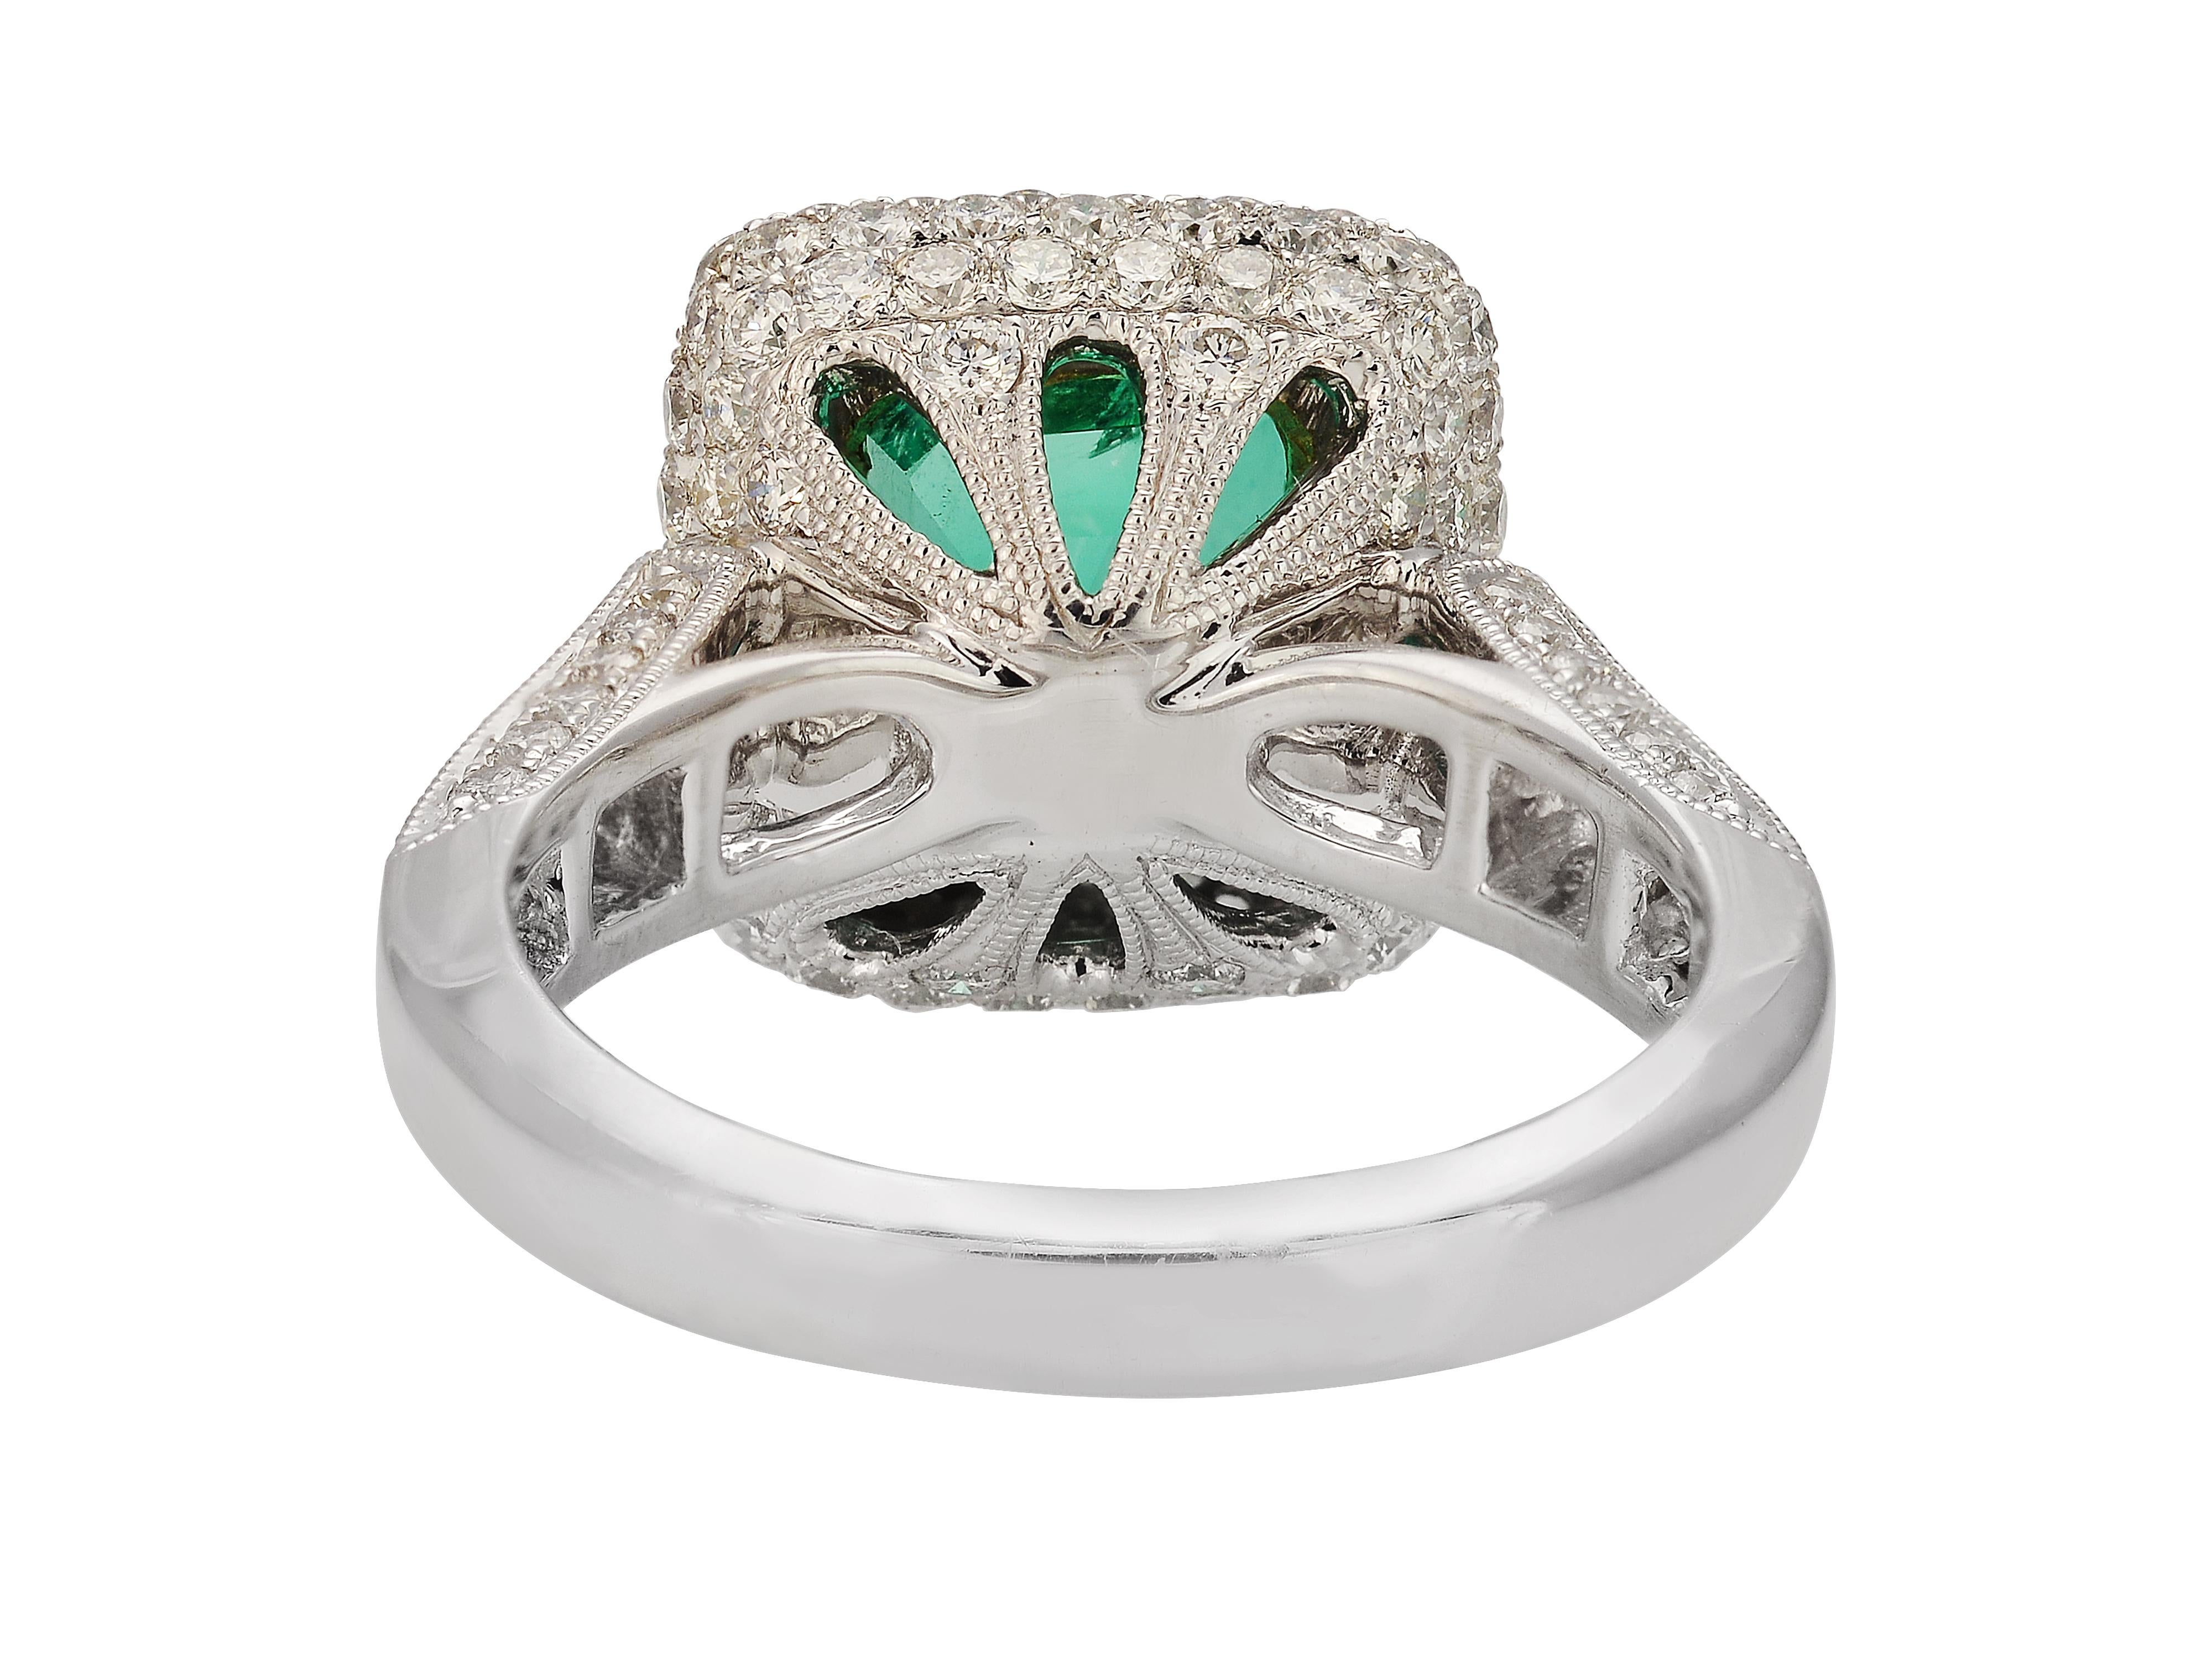 Contemporary 3.13 Carat Colombian Emerald Cocktail Ring